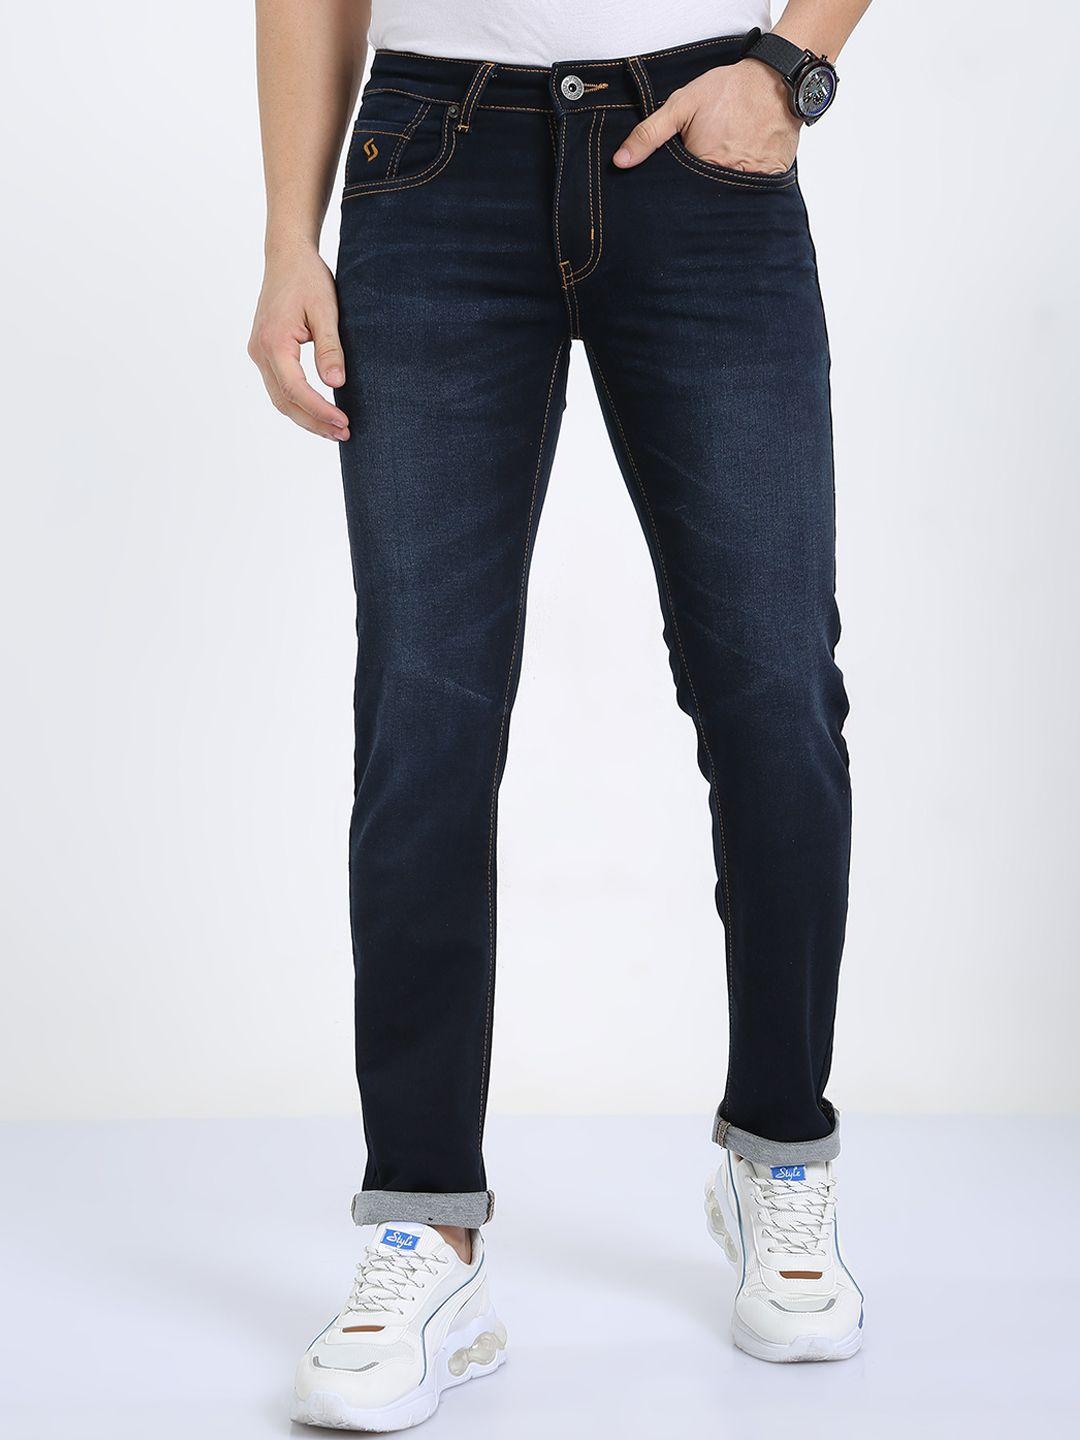 classic-polo-jean-slim-fit-light-fade-clean-look-stretchable-jeans